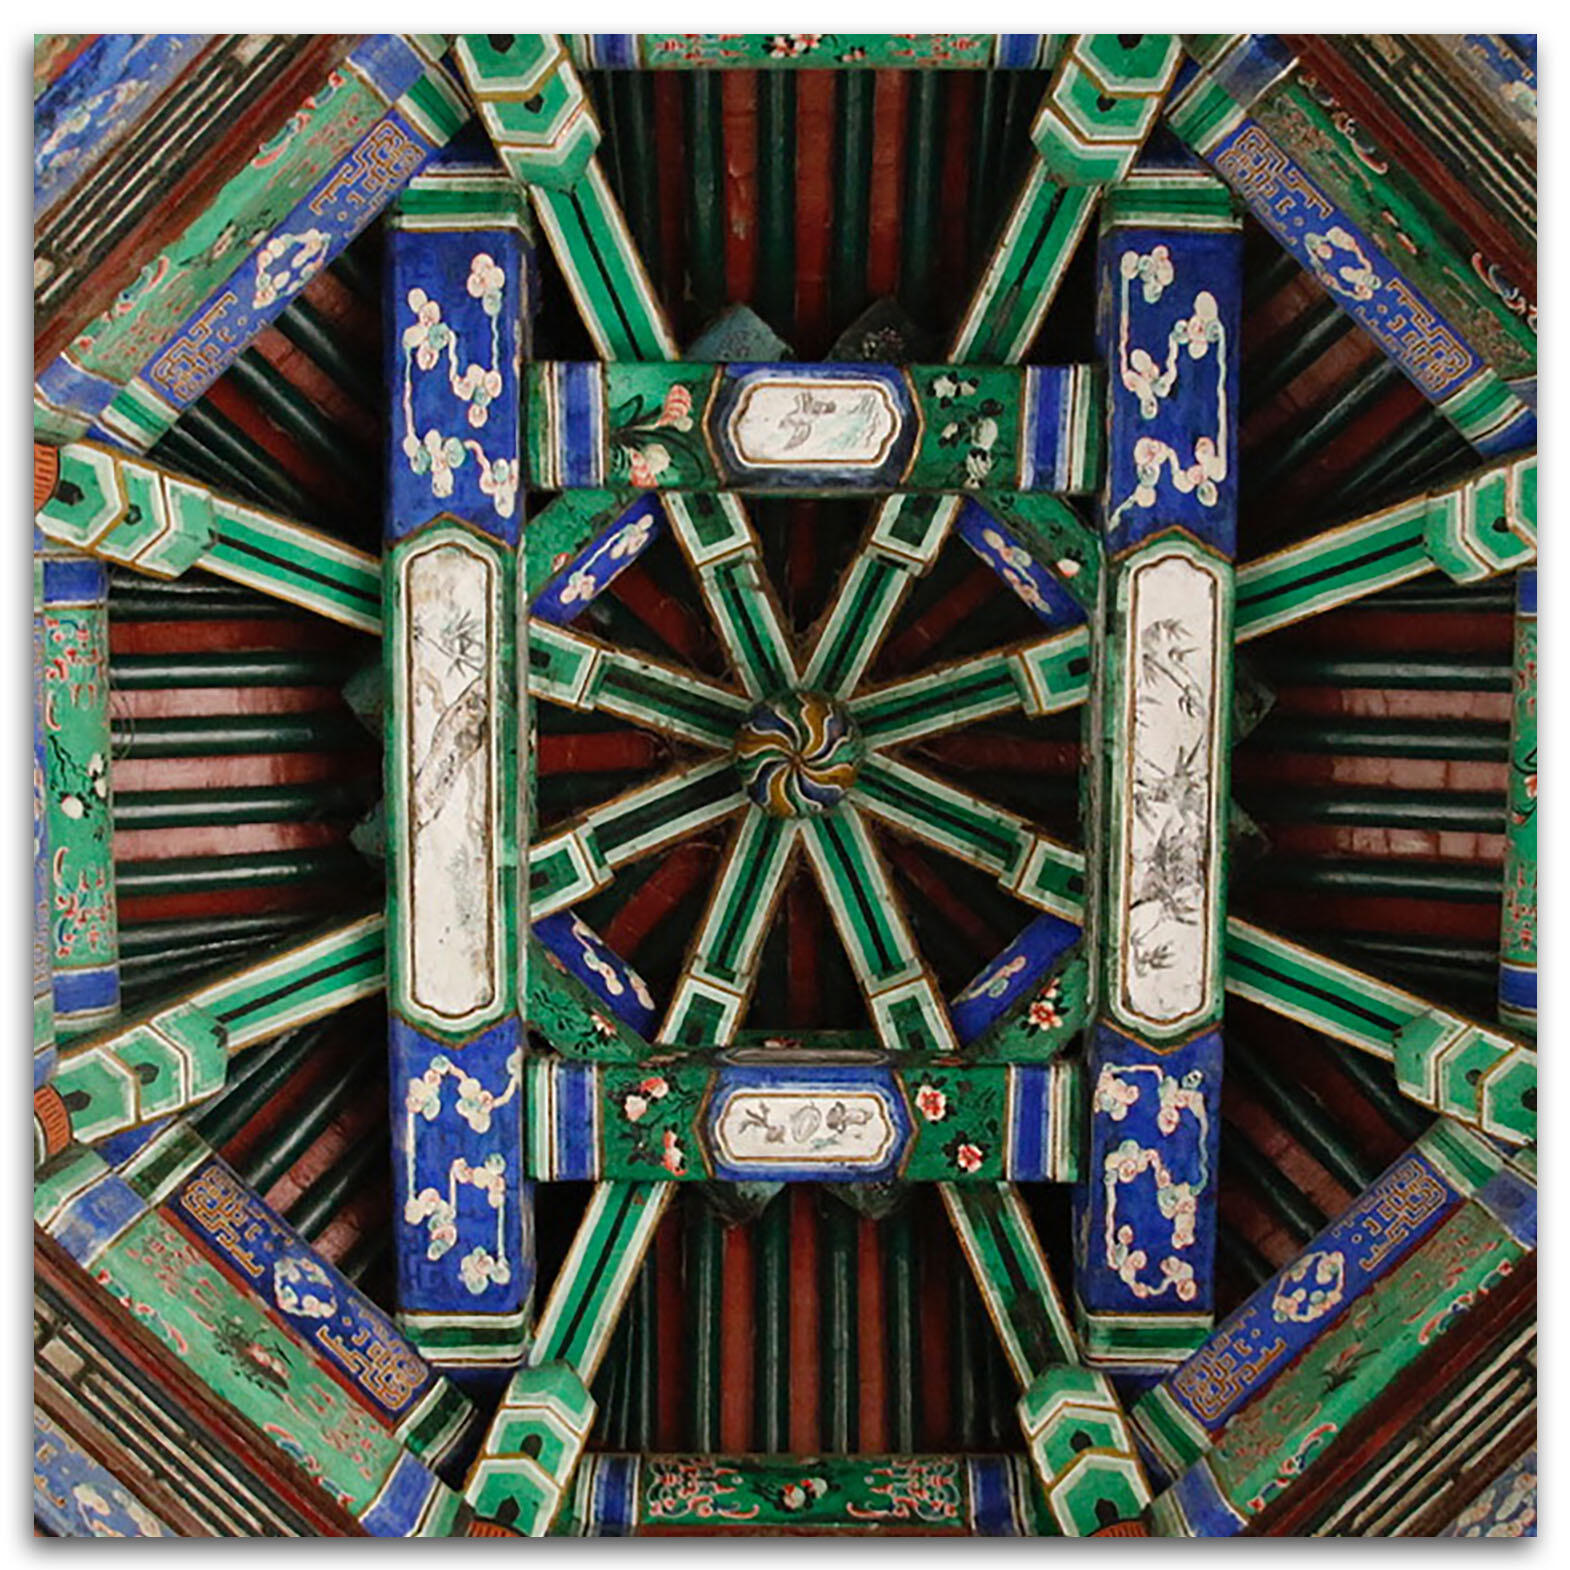 An intricate pattern of wooden ceiling beams in the shape of a dharma wheel, seen from below, painted in blue green red and white